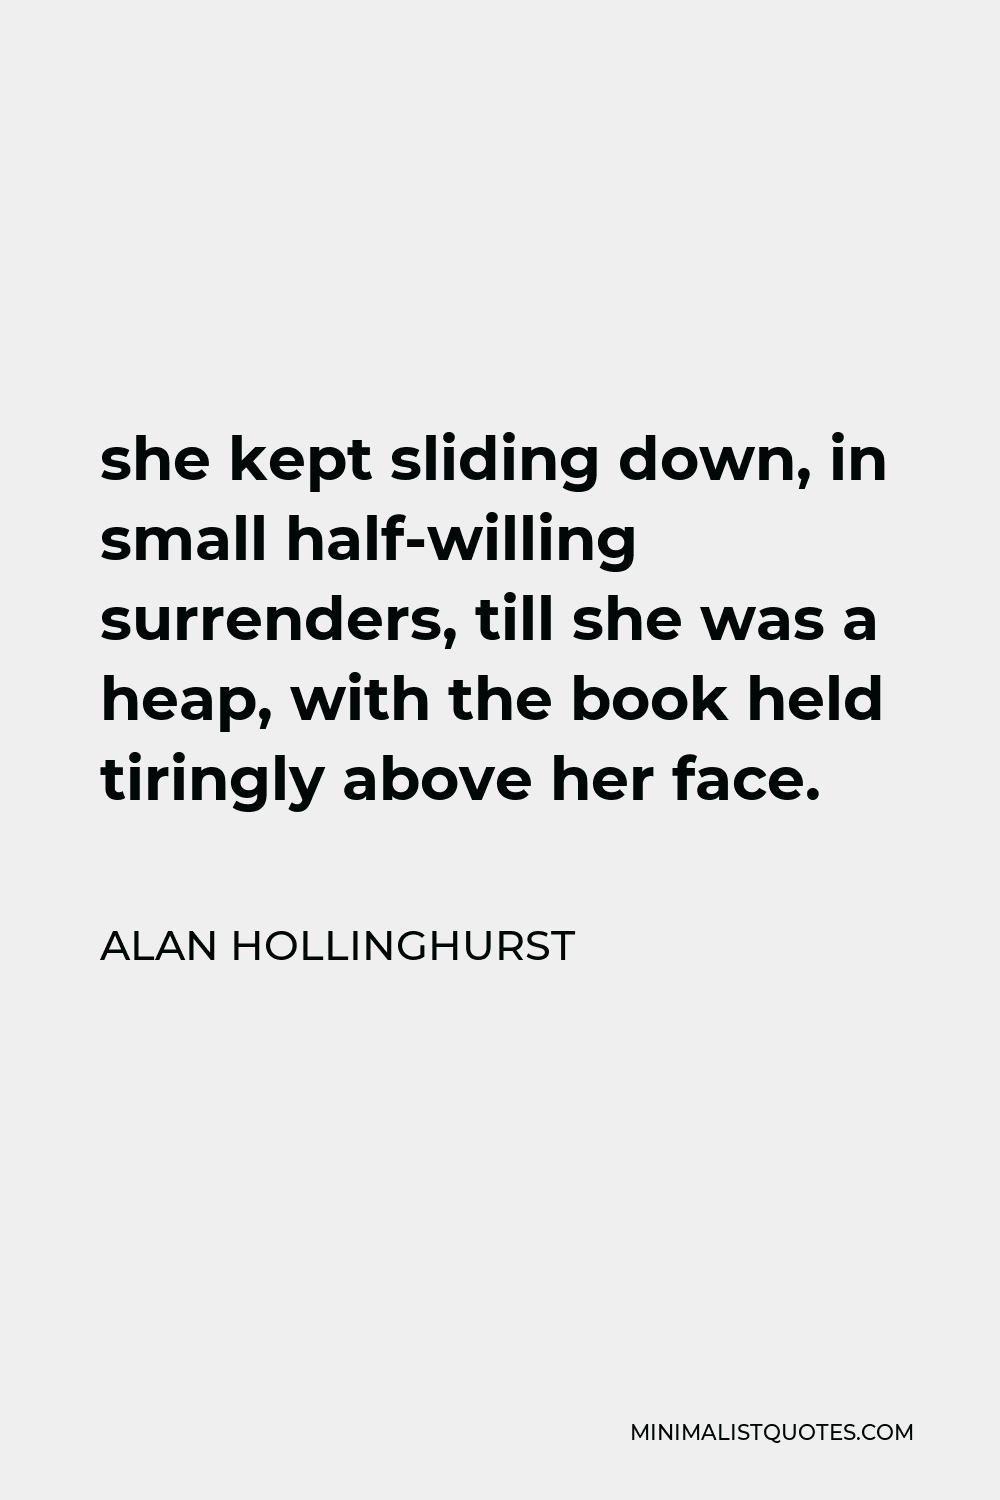 Alan Hollinghurst Quote - she kept sliding down, in small half-willing surrenders, till she was a heap, with the book held tiringly above her face.